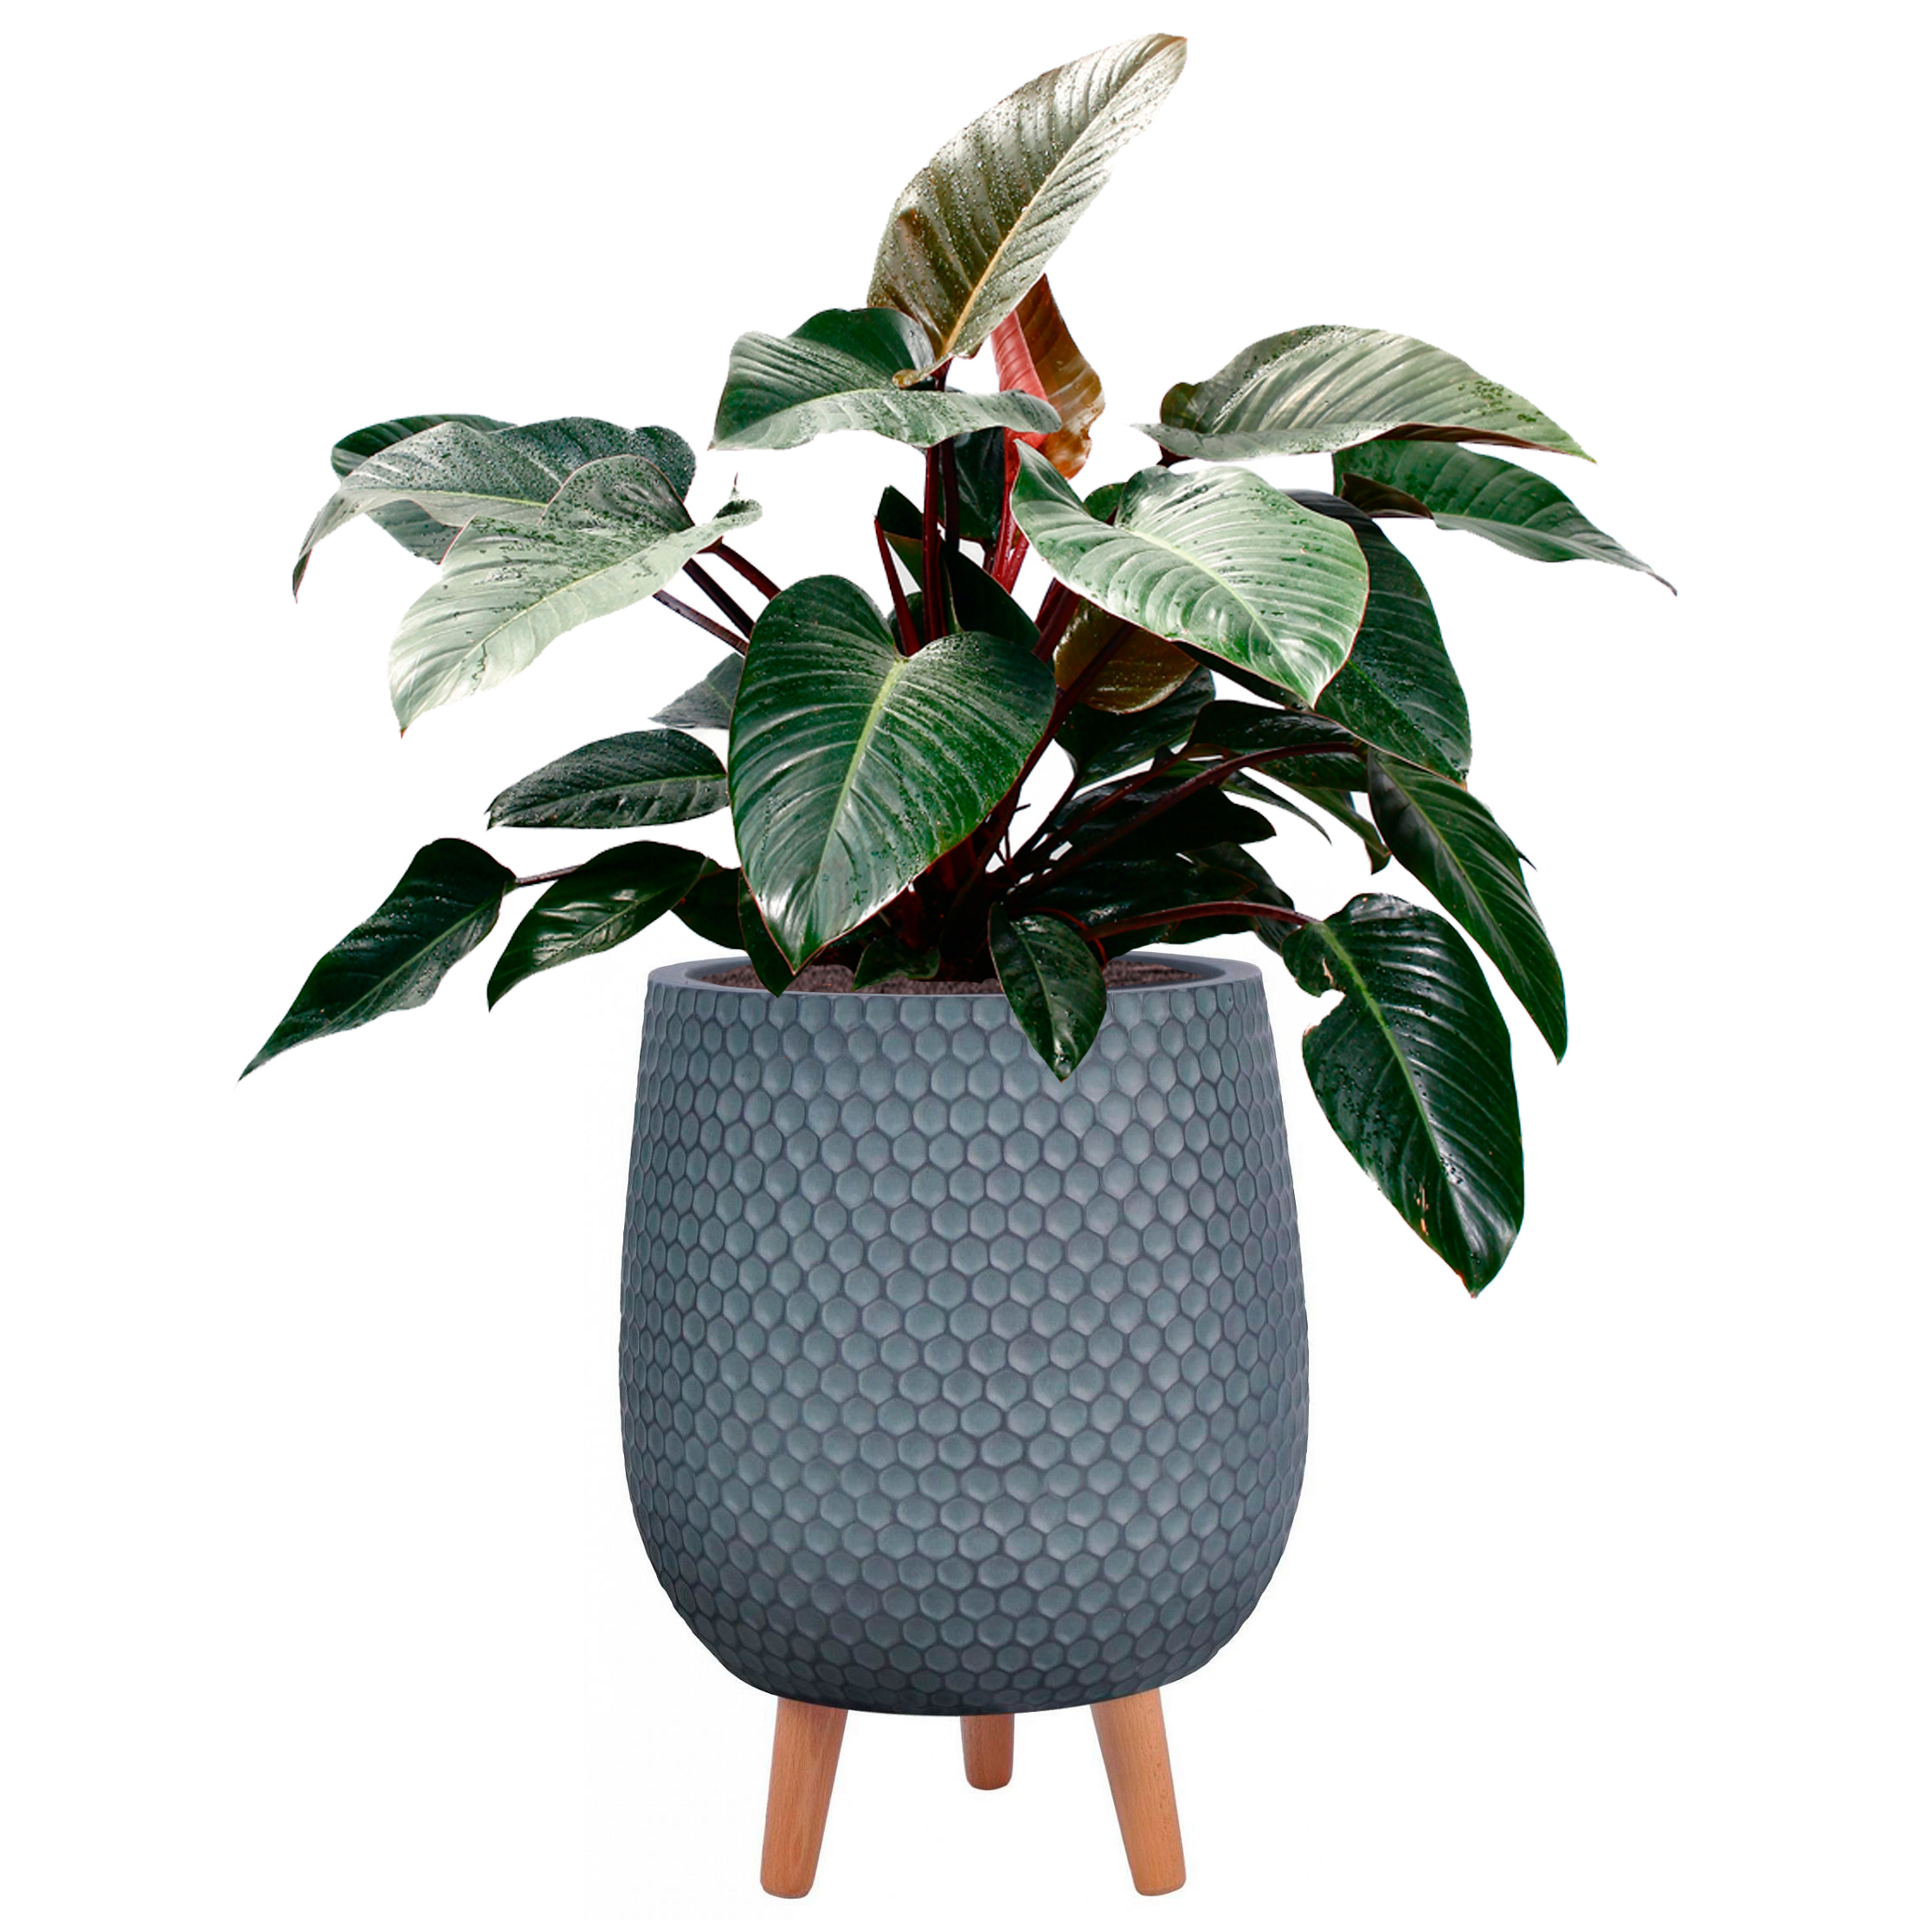 Honeycomb Style Slate Grey Indoor Egg Planter with Legs D44 H55 cm, 59.6 ltrs Cap.